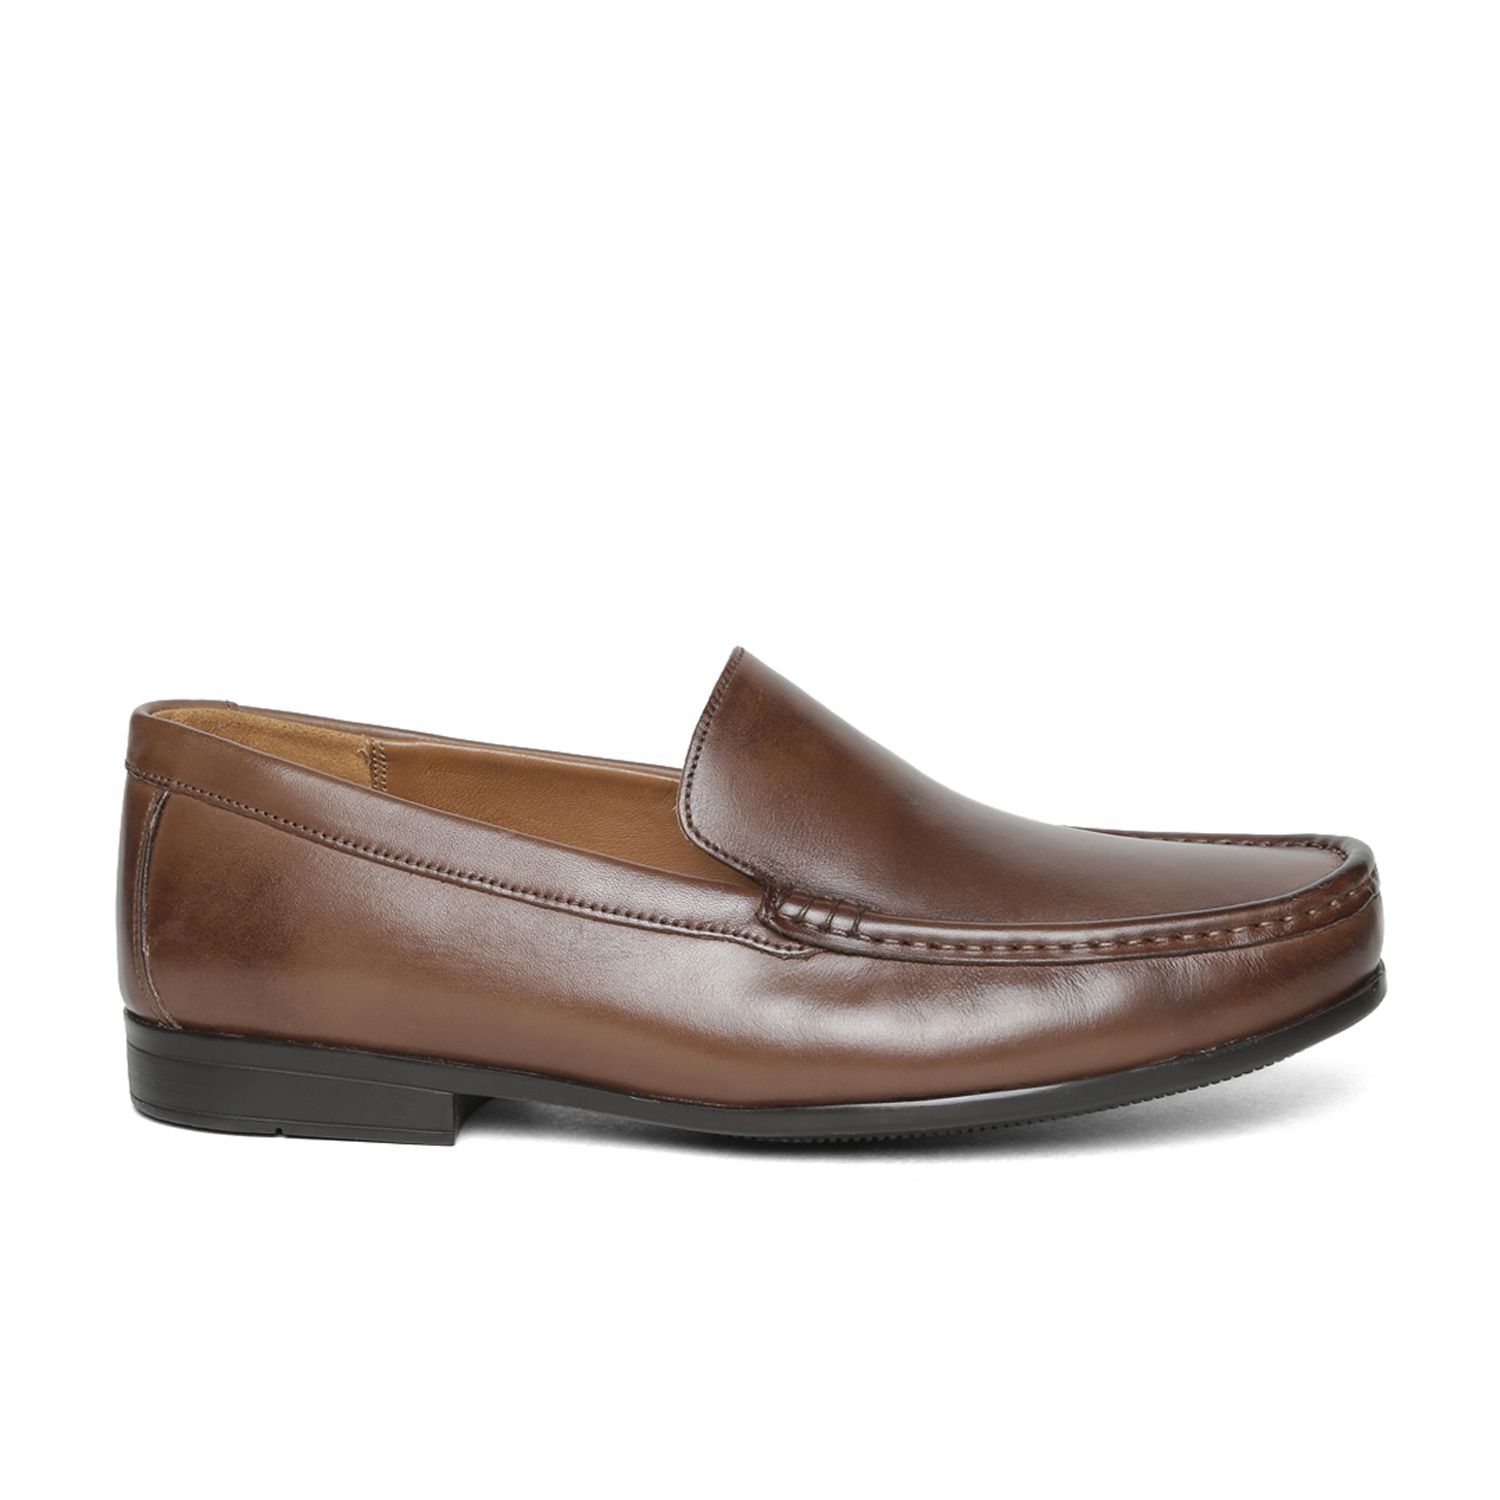 Clarks Brown Loafers - Buy Clarks Brown Loafers Online at Best Prices ...